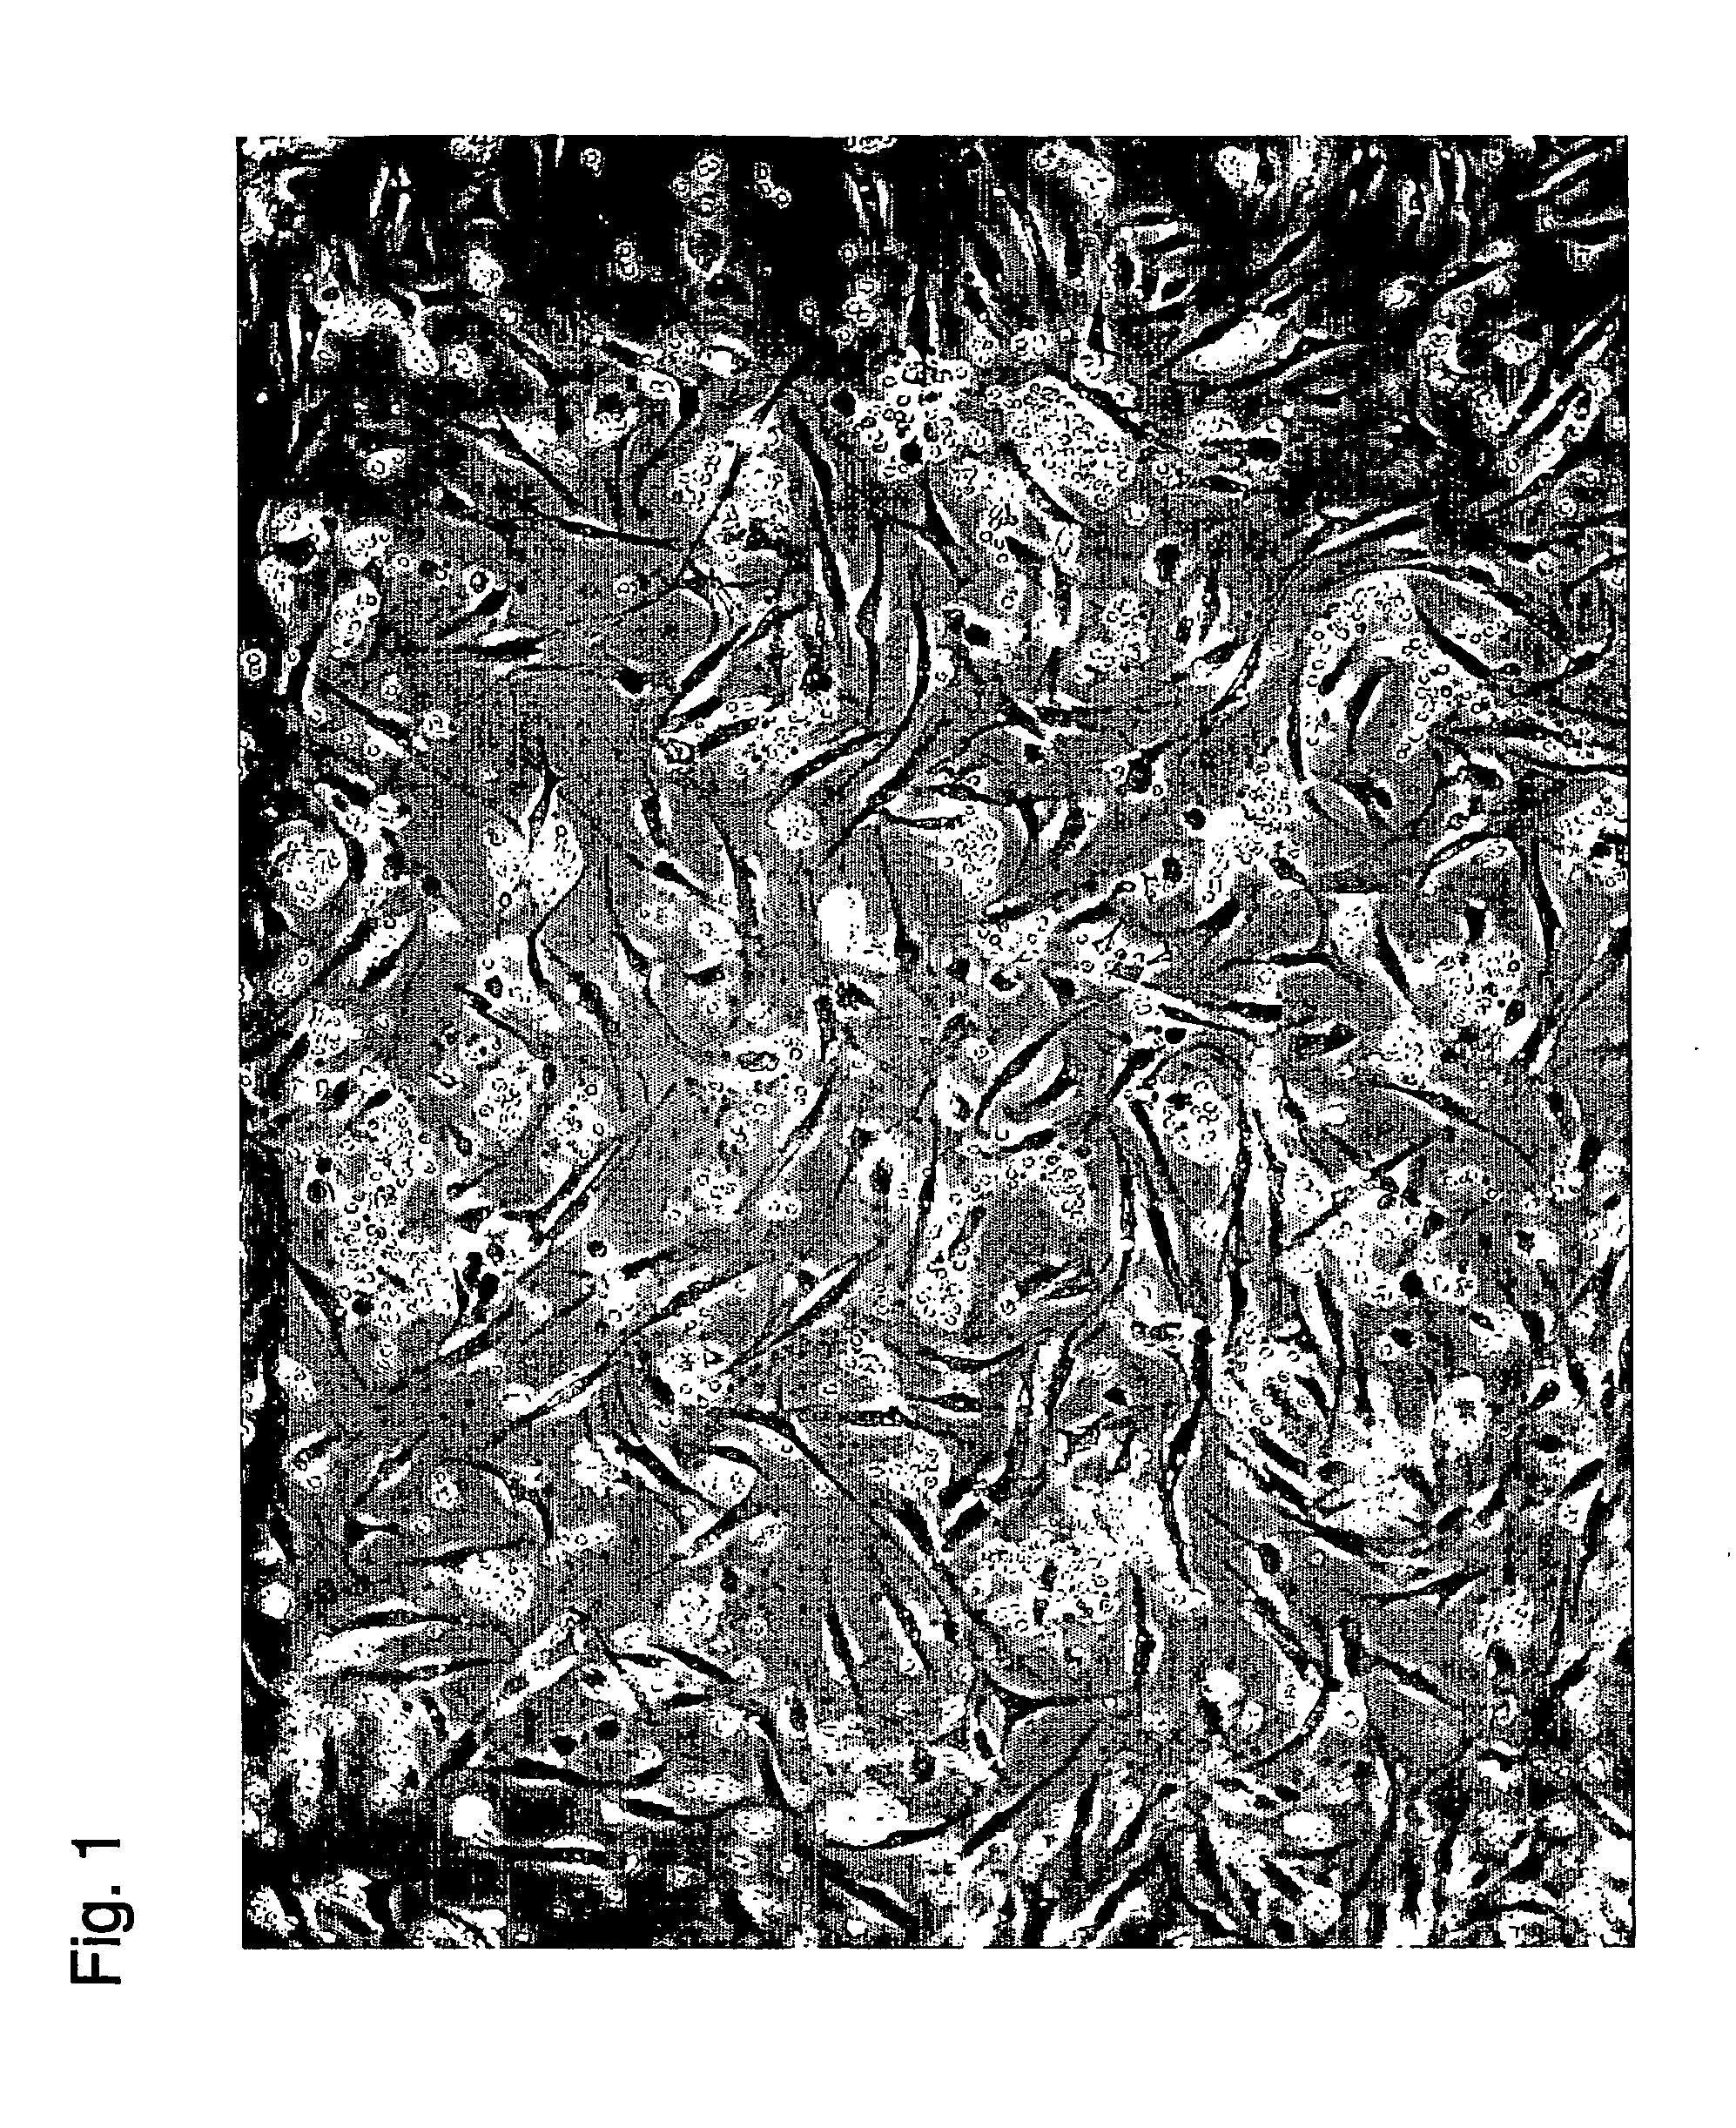 Method and system for preparing stem cells from fat tissue